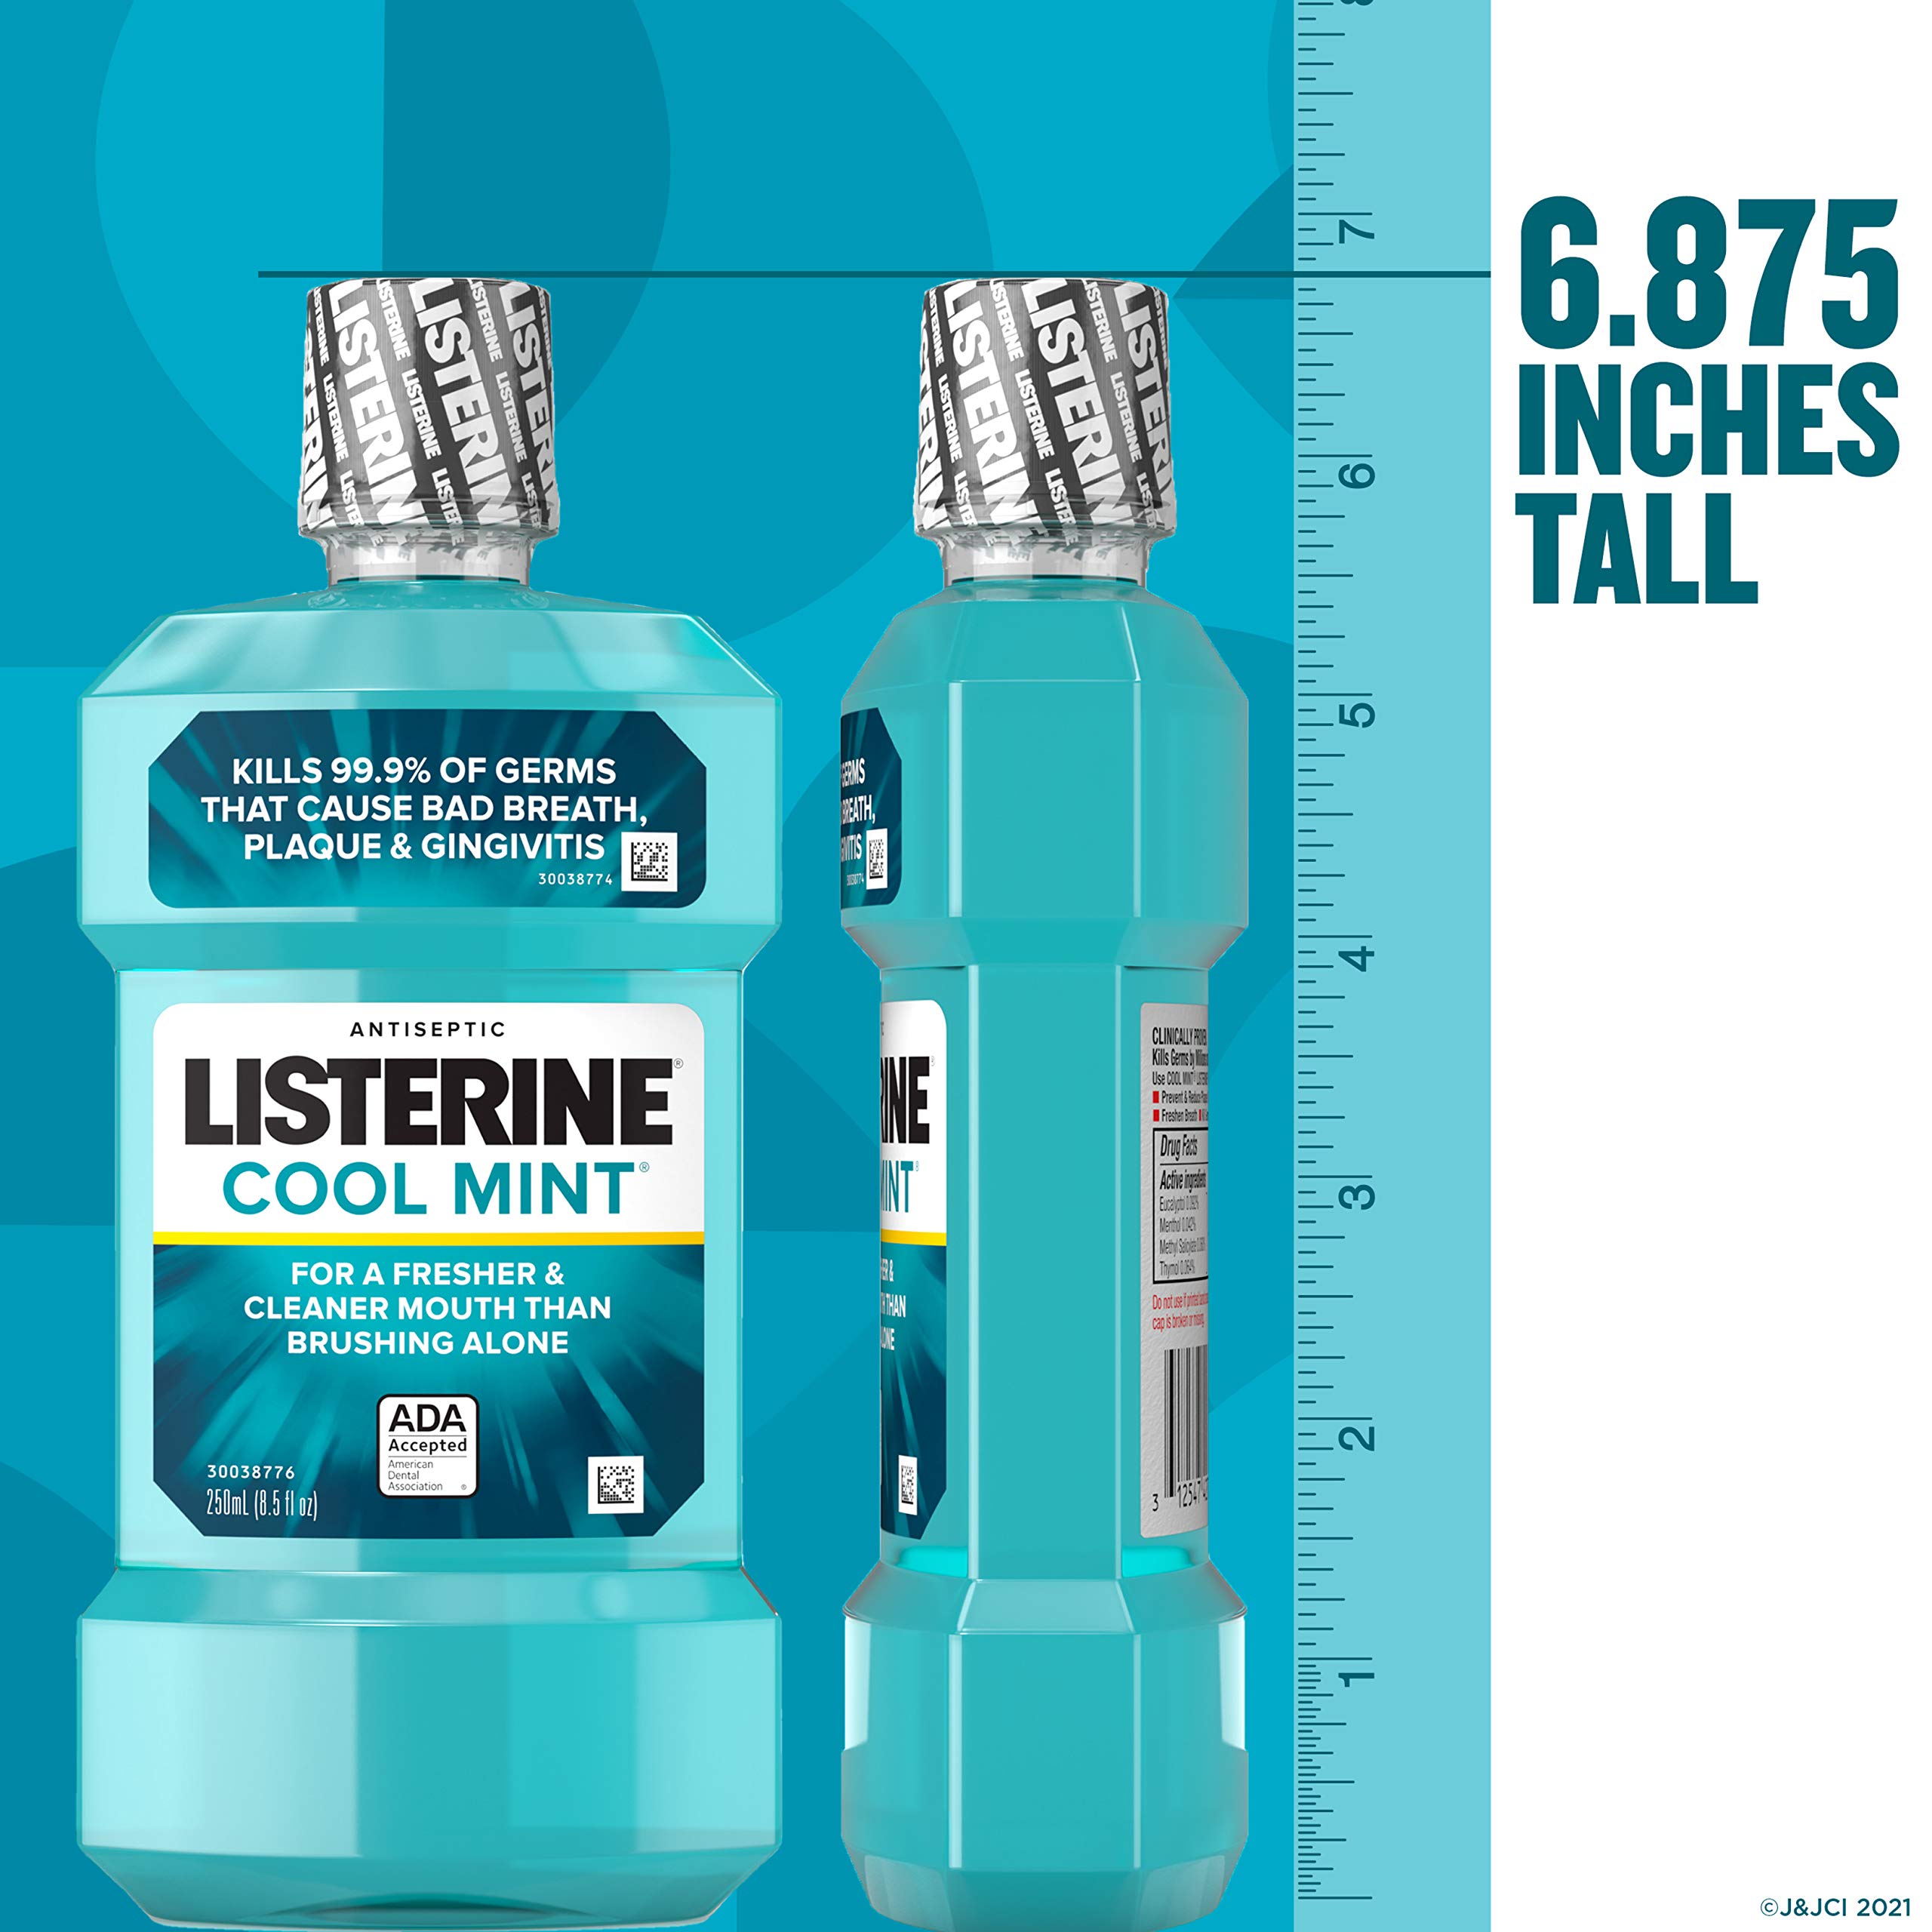 Listerine Cool Mint Antiseptic Mouthwash for Bad Breath, Plaque and Gingivitis, 250 ml